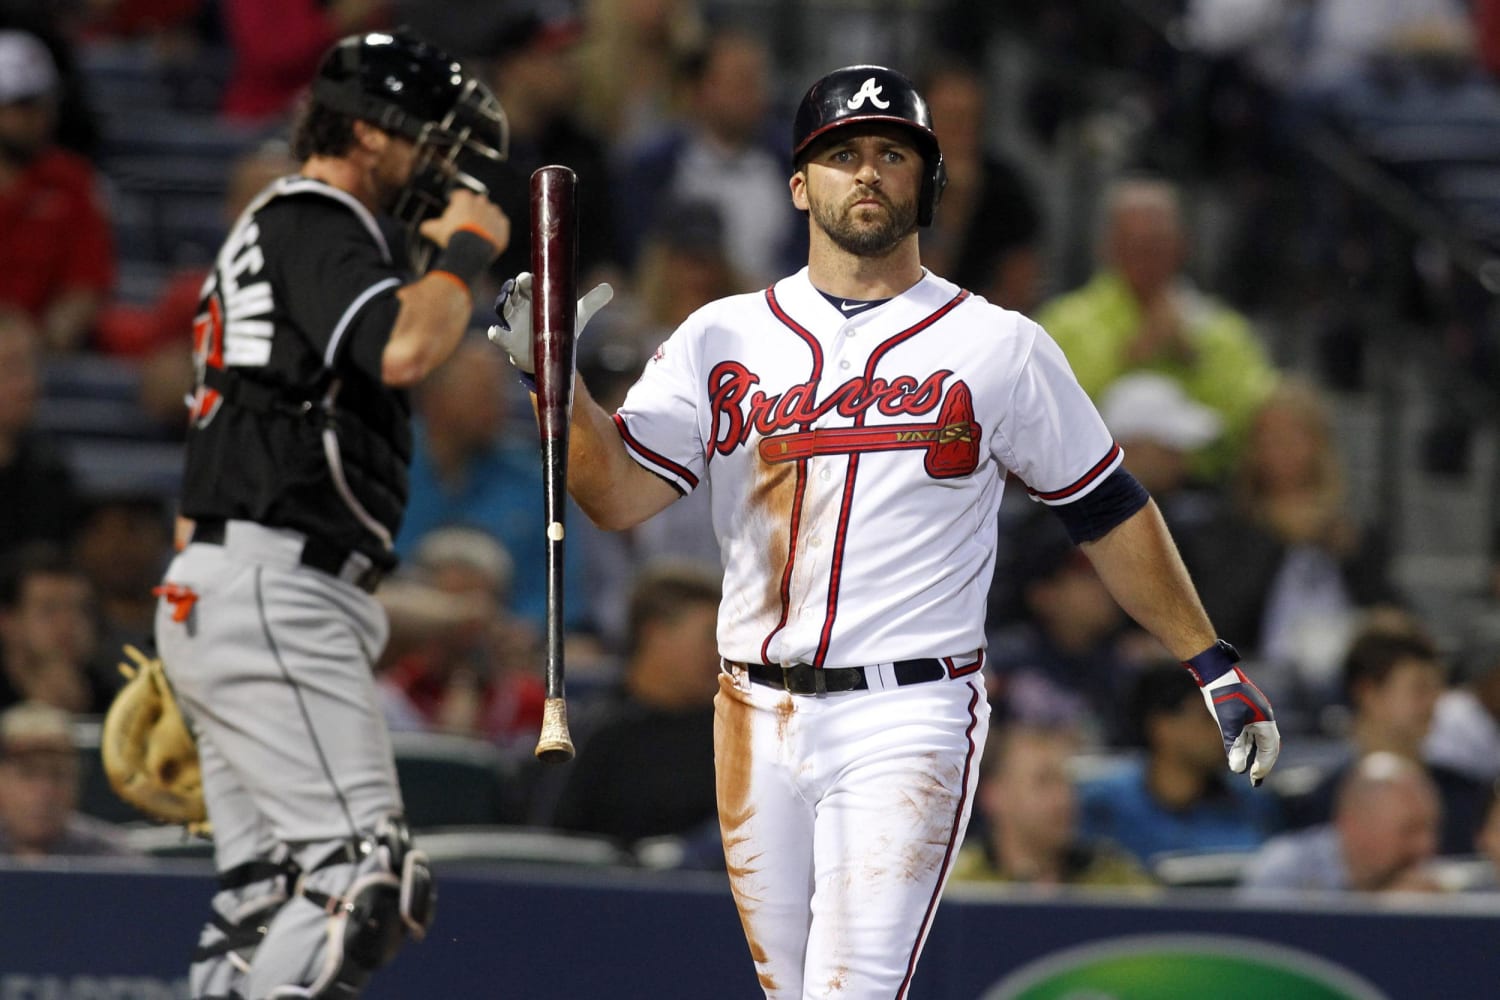 Uggla gladly changes numbers after trade to Braves - The San Diego